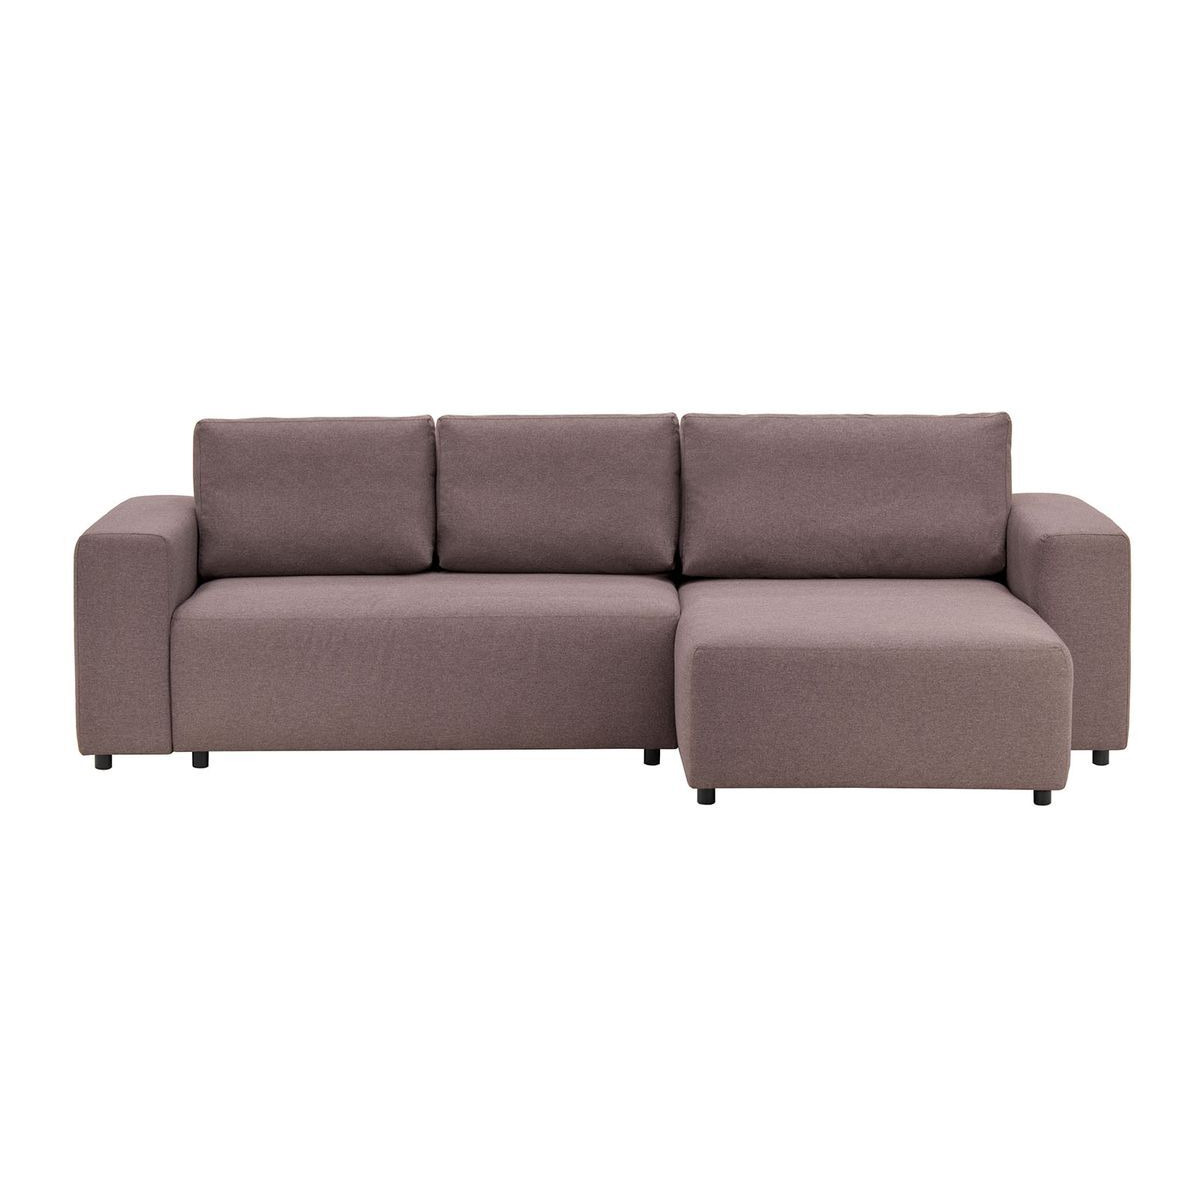 Solace Right Hand Corner Sofa Bed, lilac - image 1